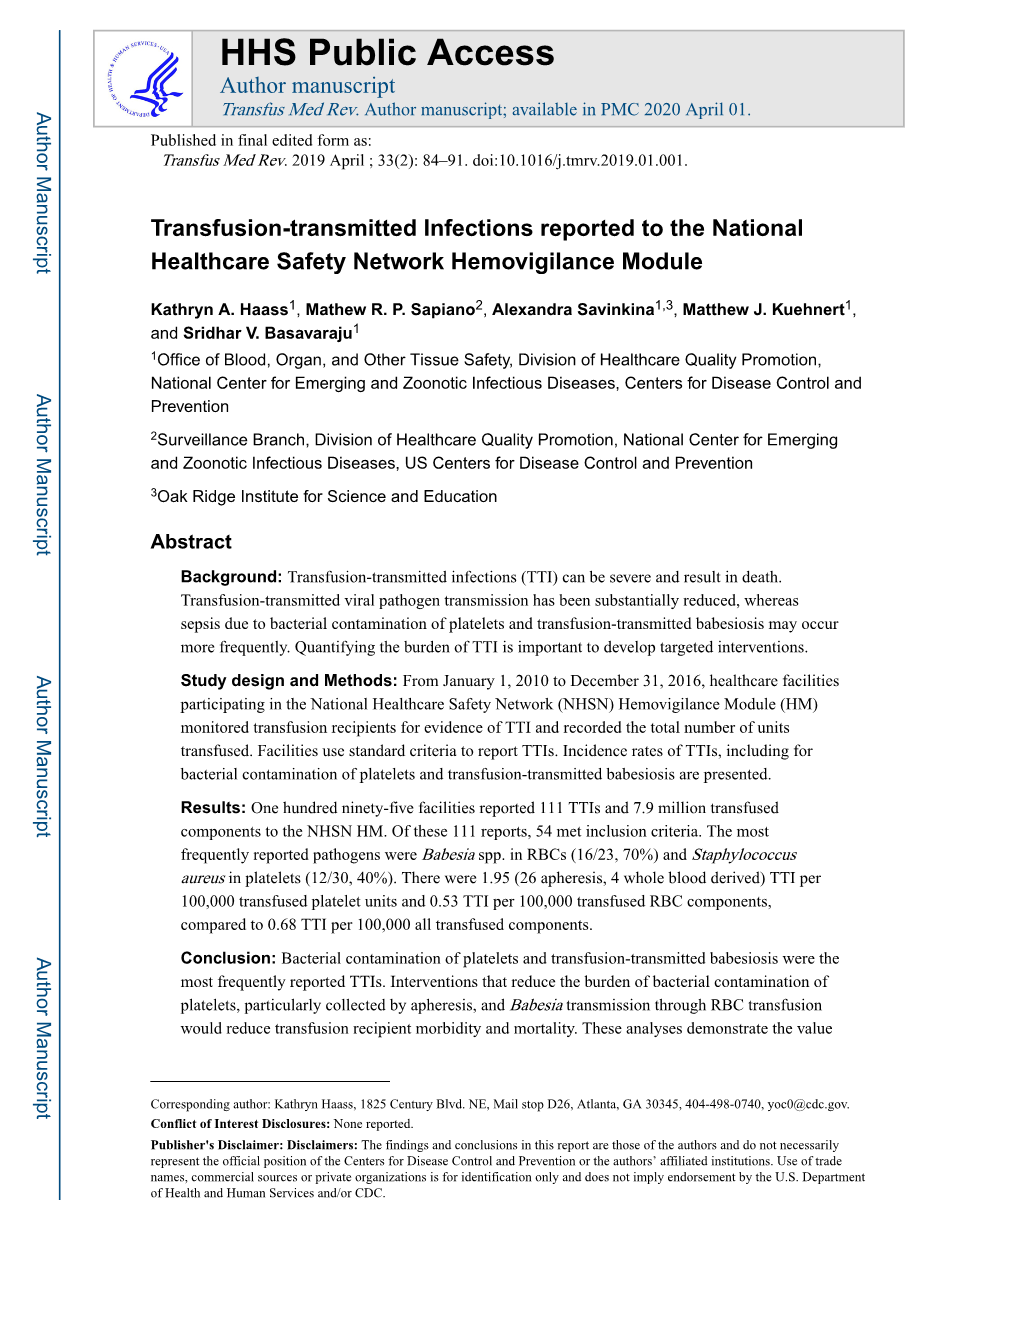 Transfusion-Transmitted Infections Reported to the National Healthcare Safety Network Hemovigilance Module